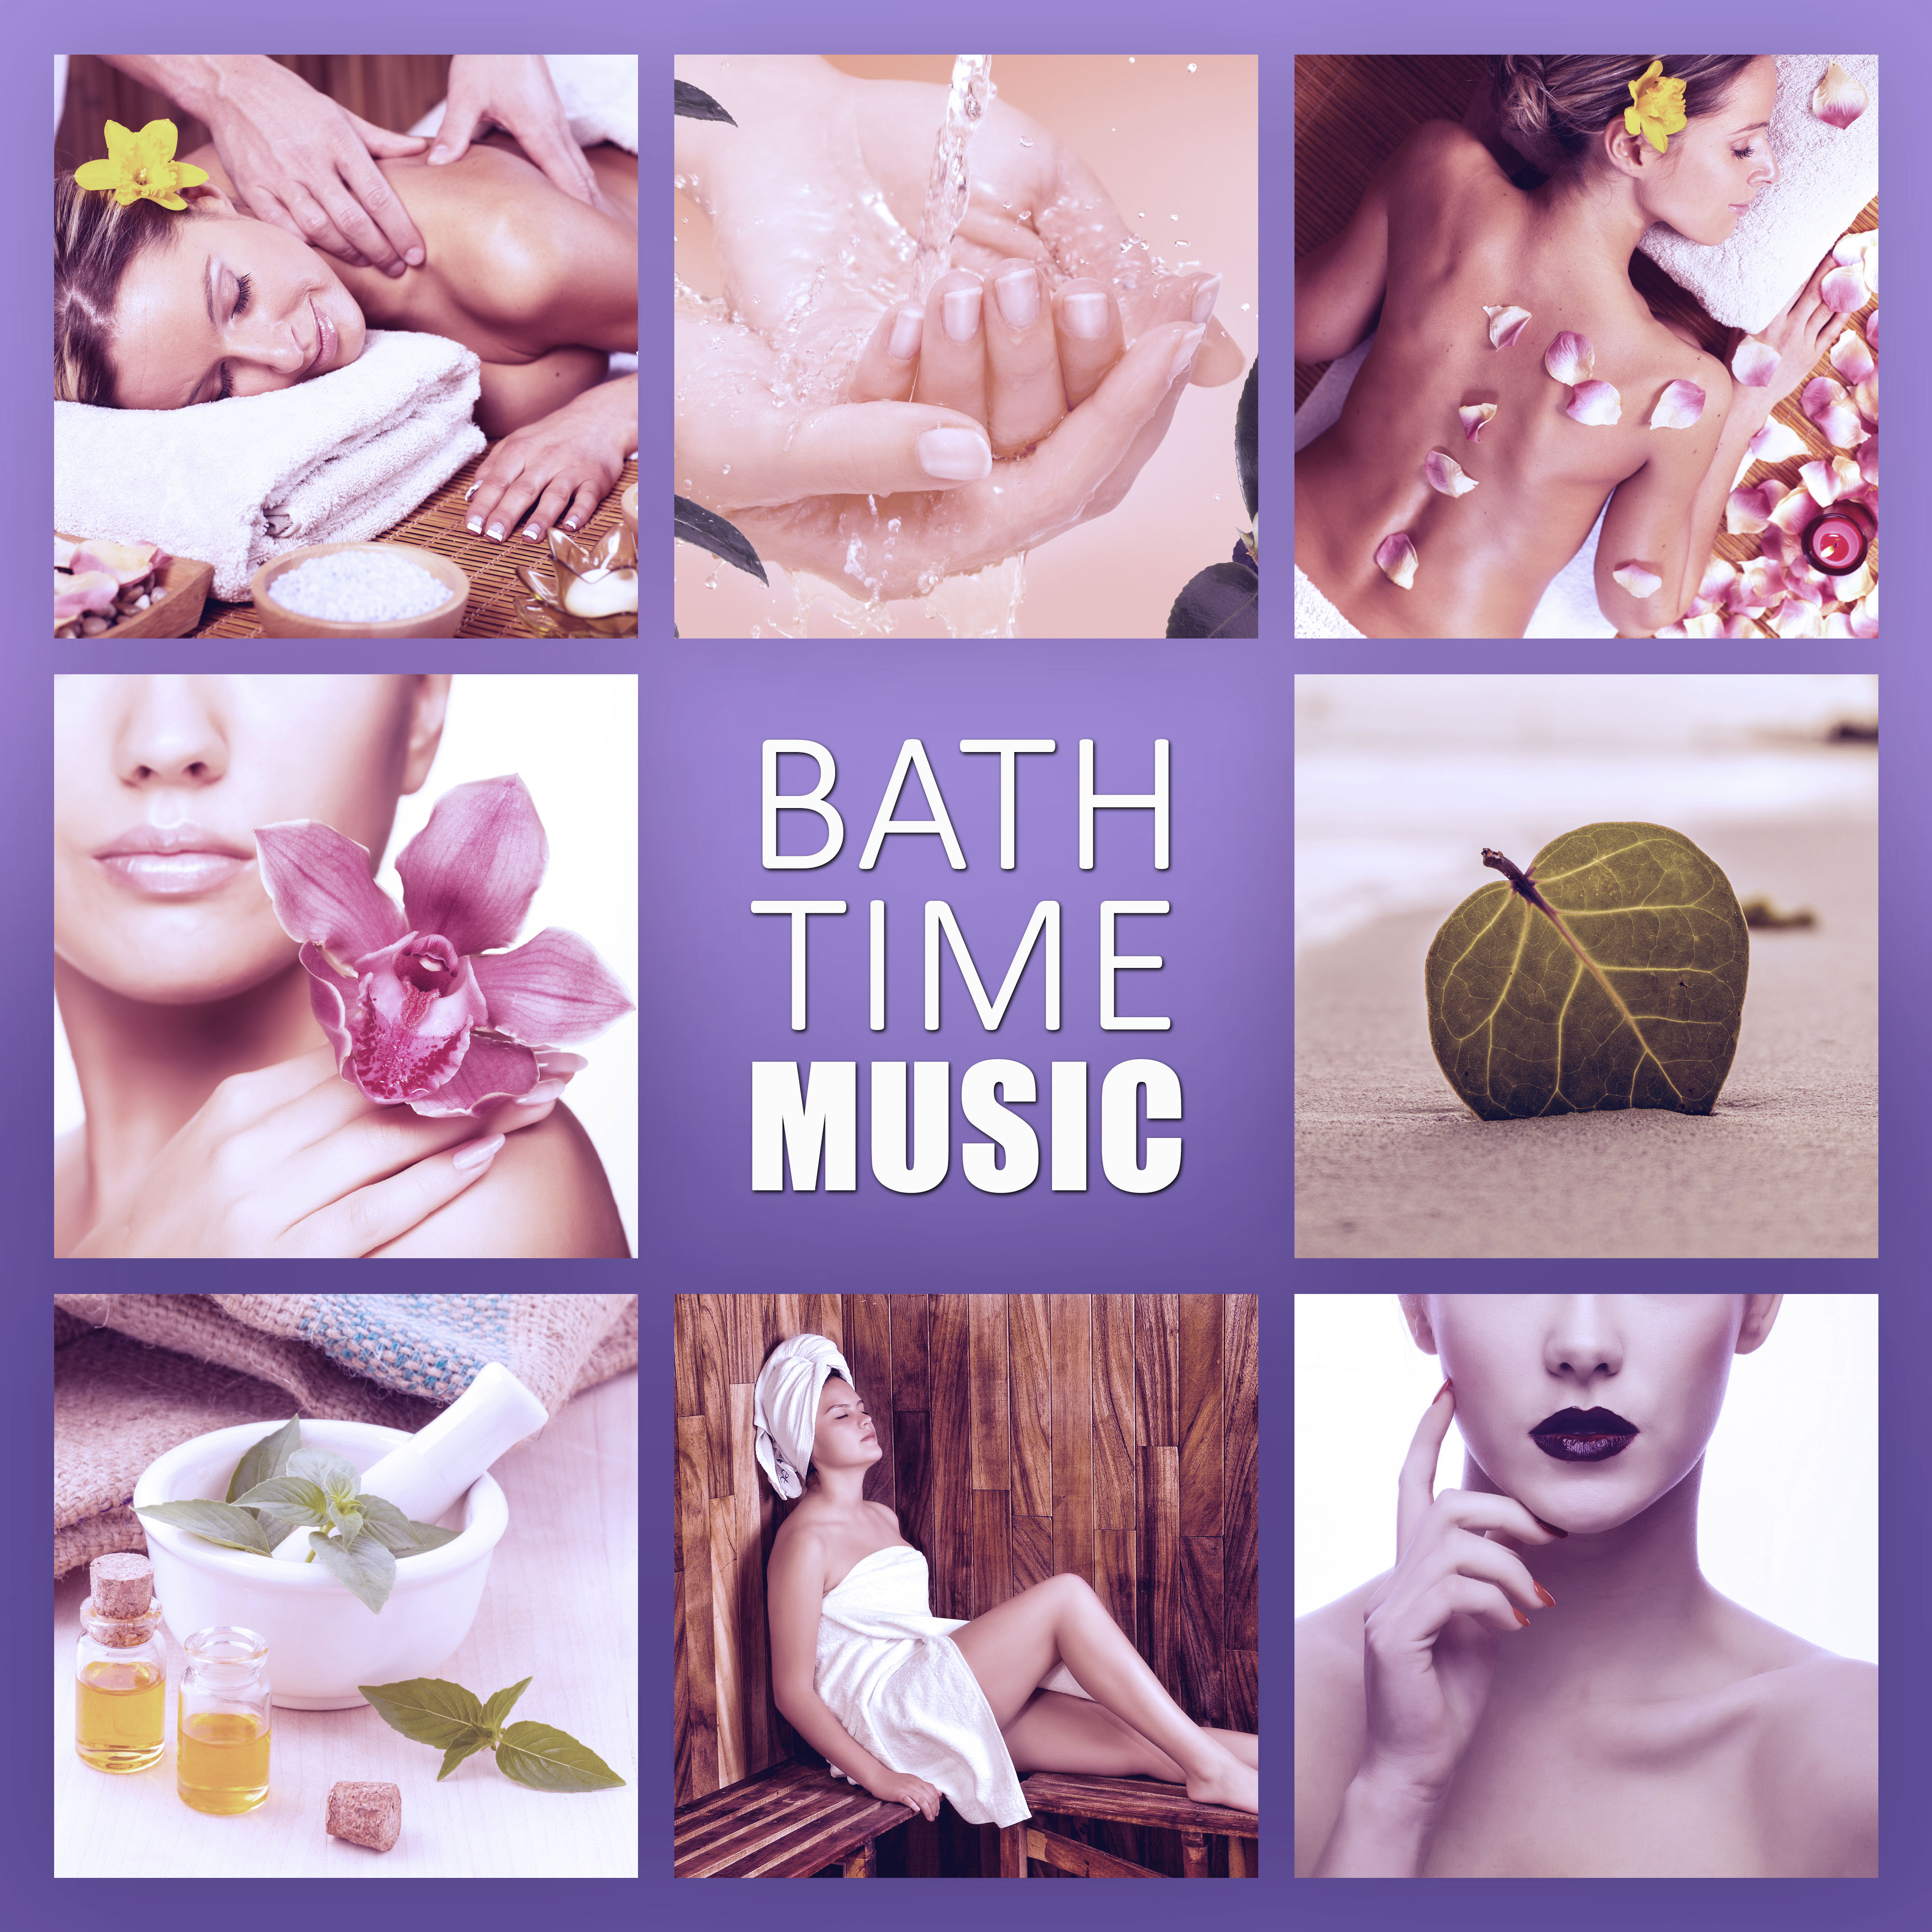 Bath Time Music  Healing Music for Deep Relaxing  to Helps You Feel Wonderfull at Your Home, Spa Day at Home, Inner Therapy, Calming Music, Deep Rest, Nature Sounds